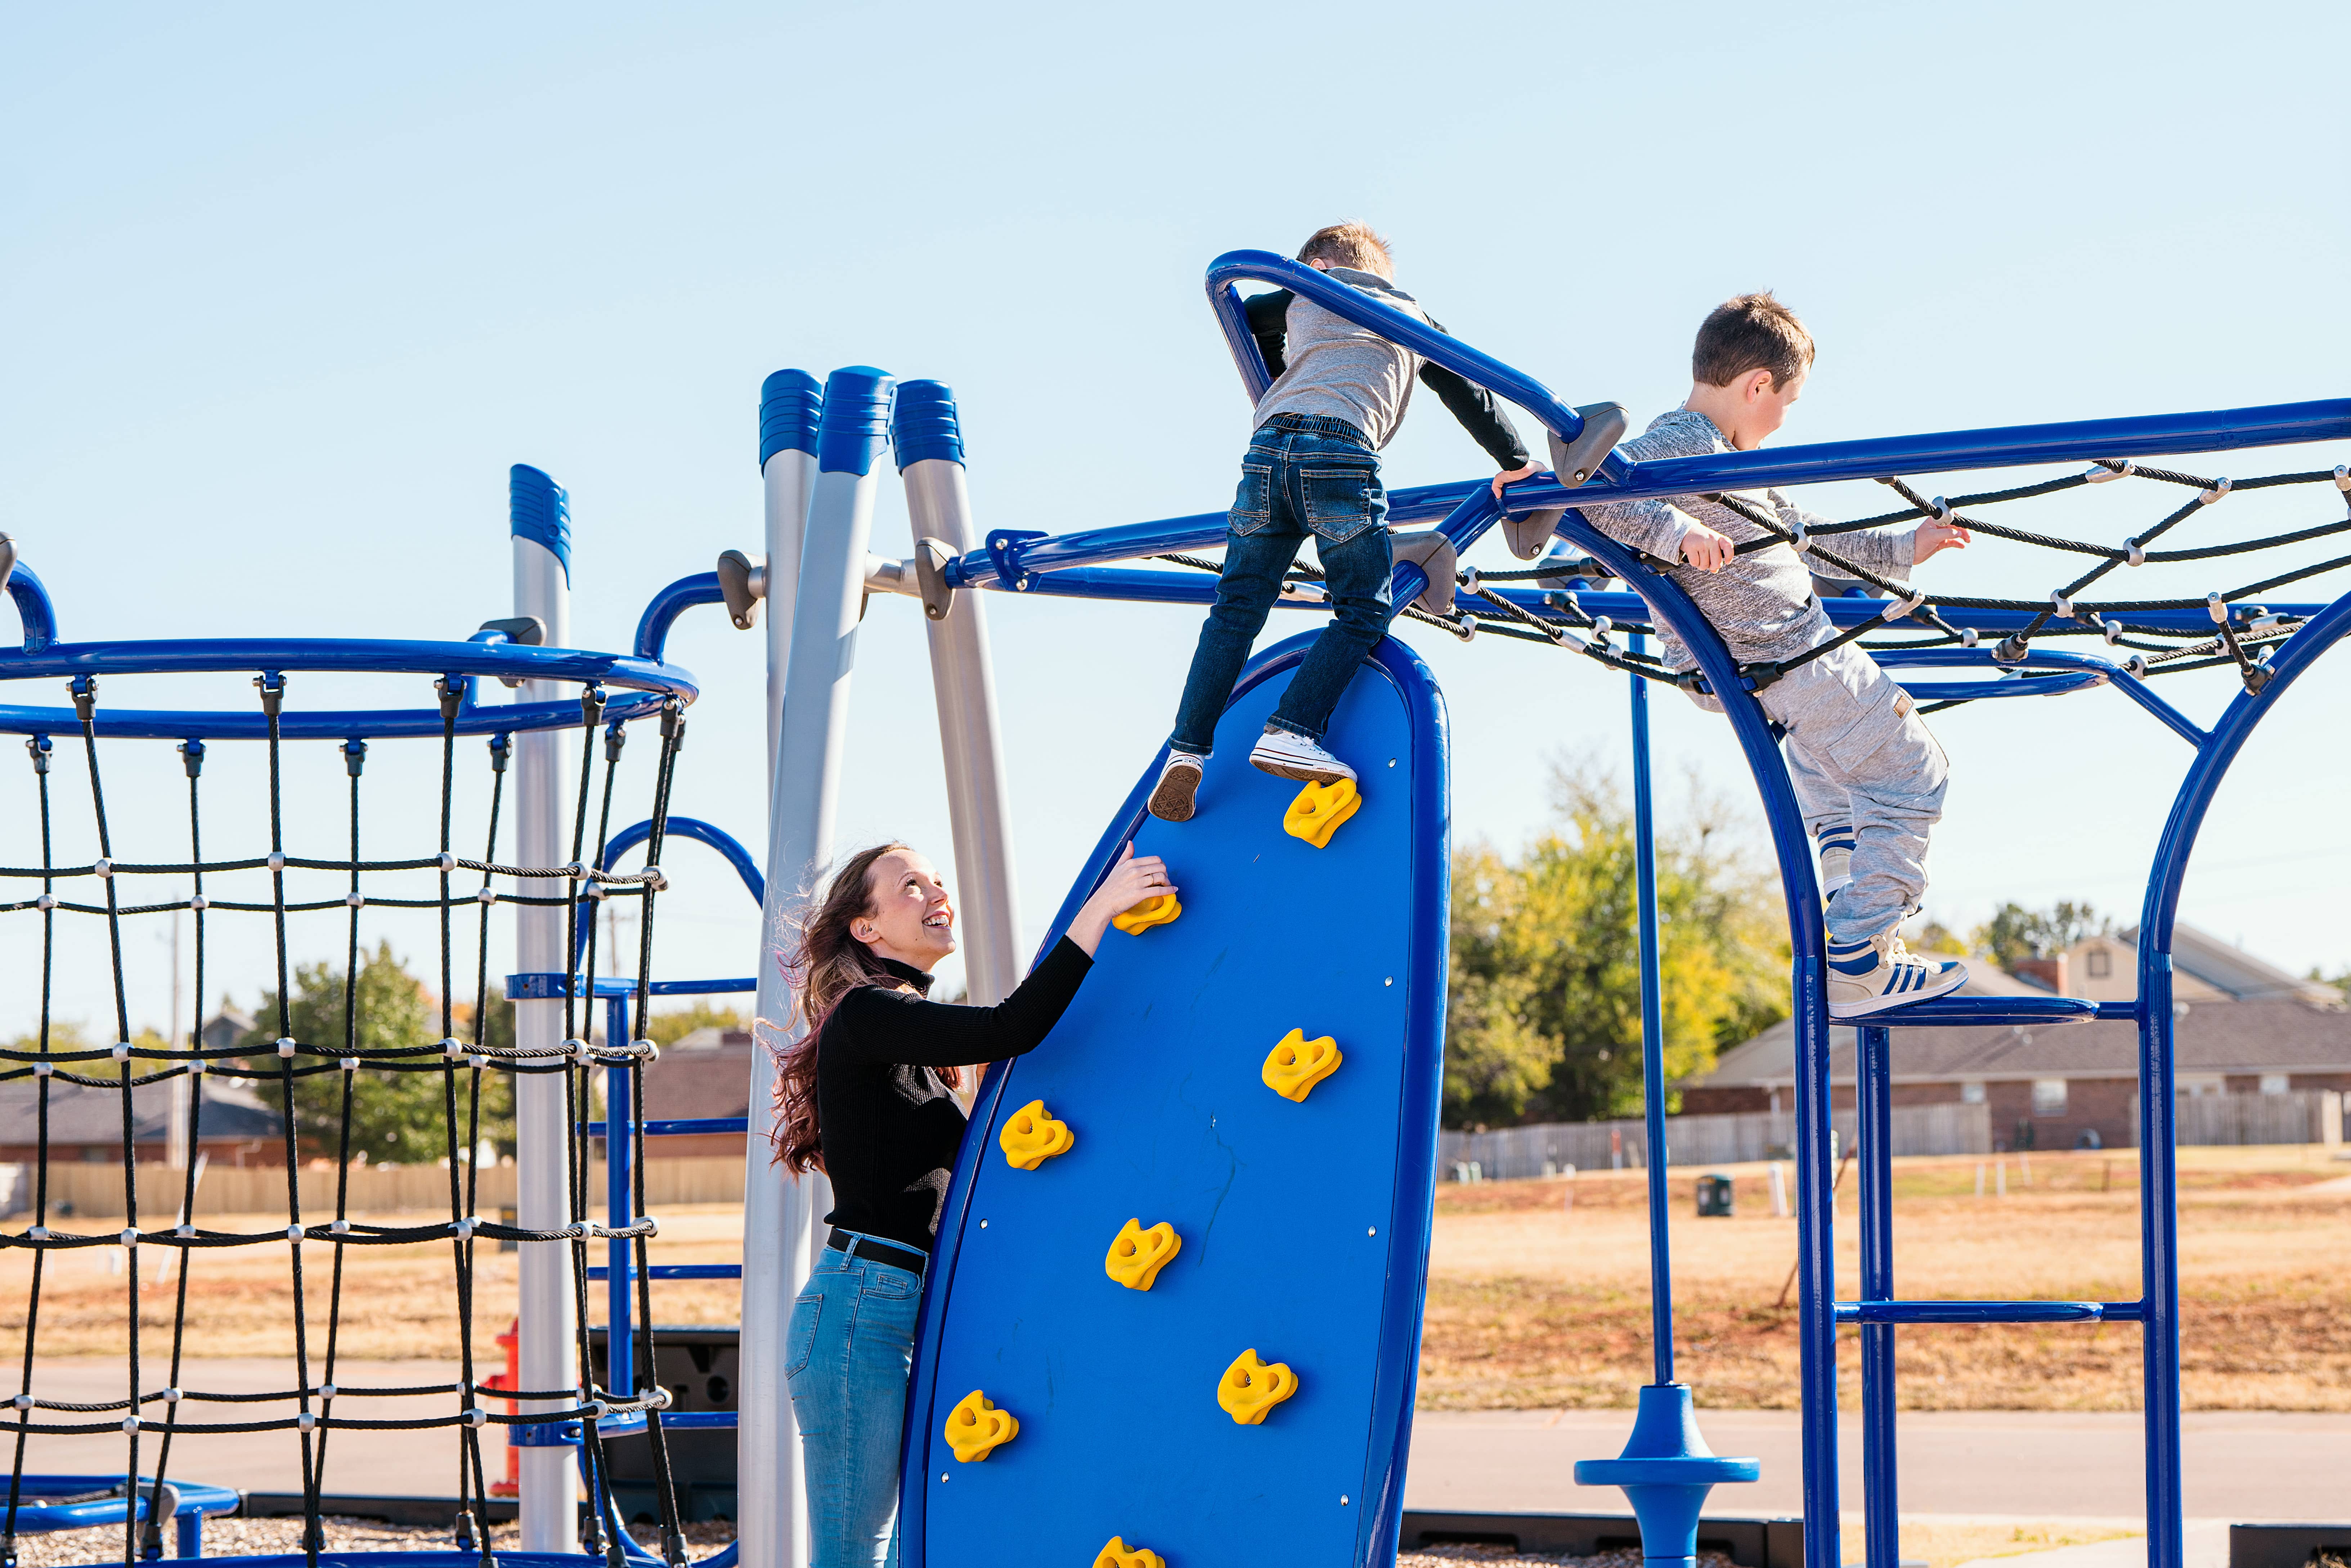 Mother and her two children playing on playground equipment in a TimberCraft community